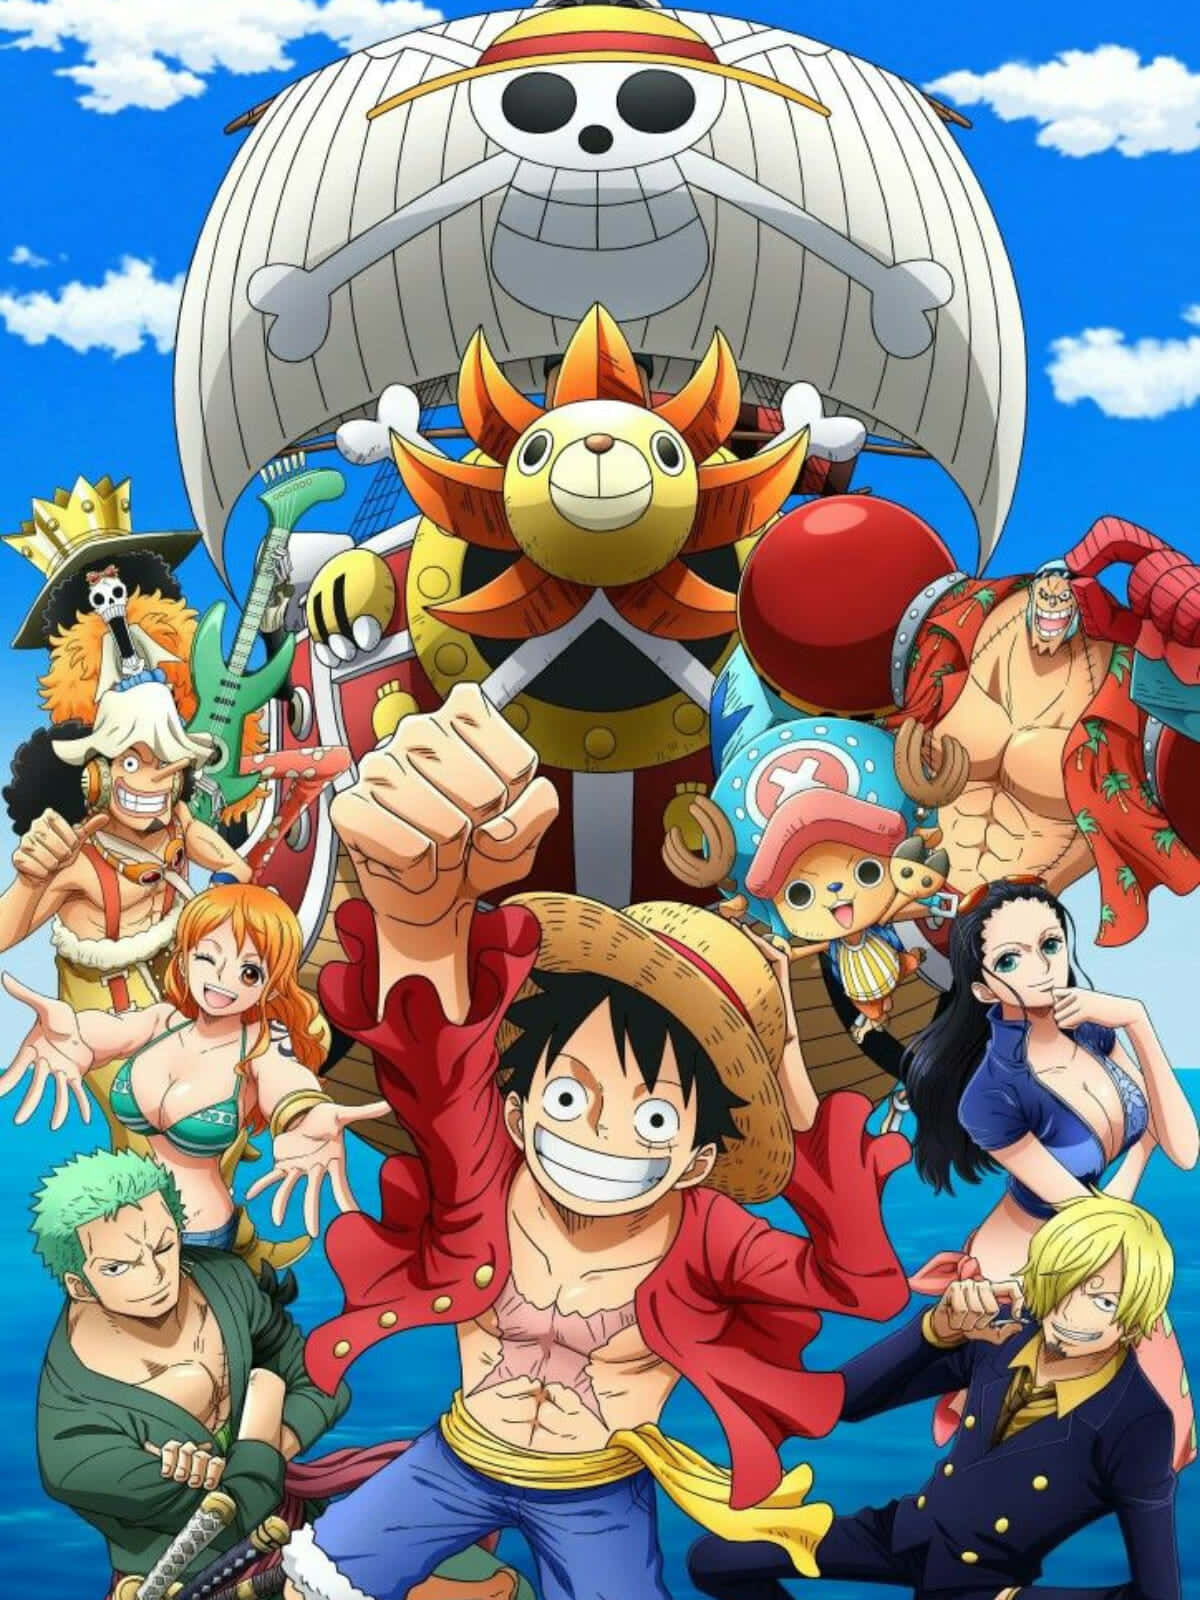 Straw Hat Pirates Ready to Sail the High Seas Wallpaper